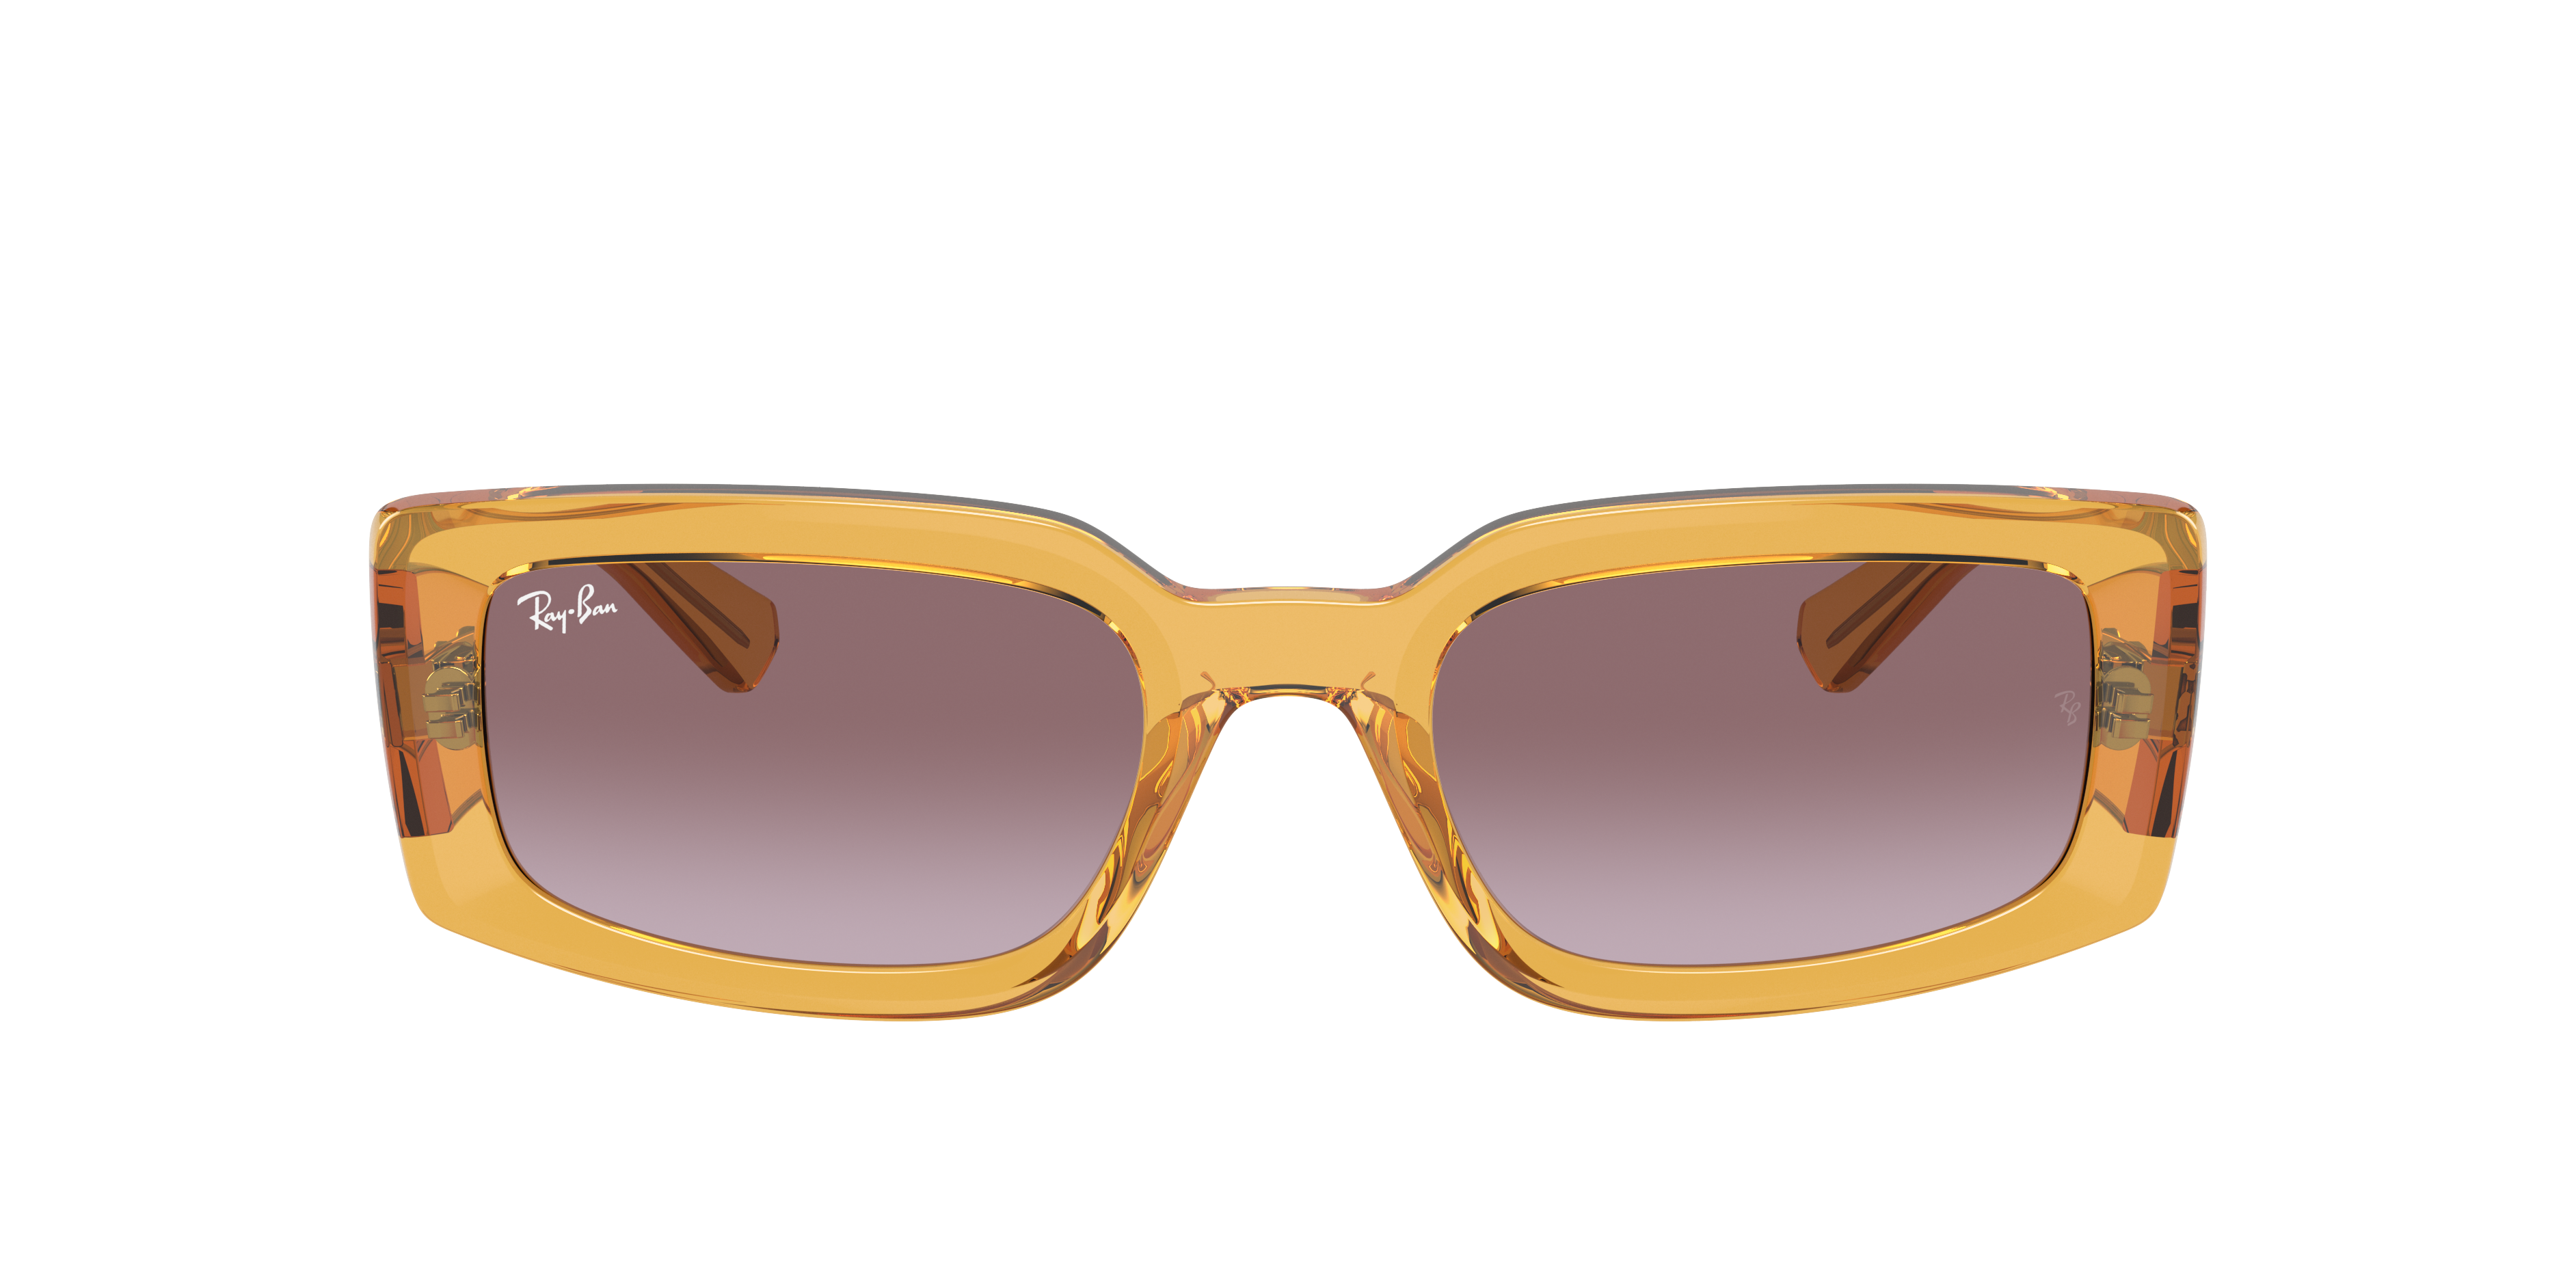 Ray-Ban® Sunglasses Official US Store: up to 50% Off on Select 